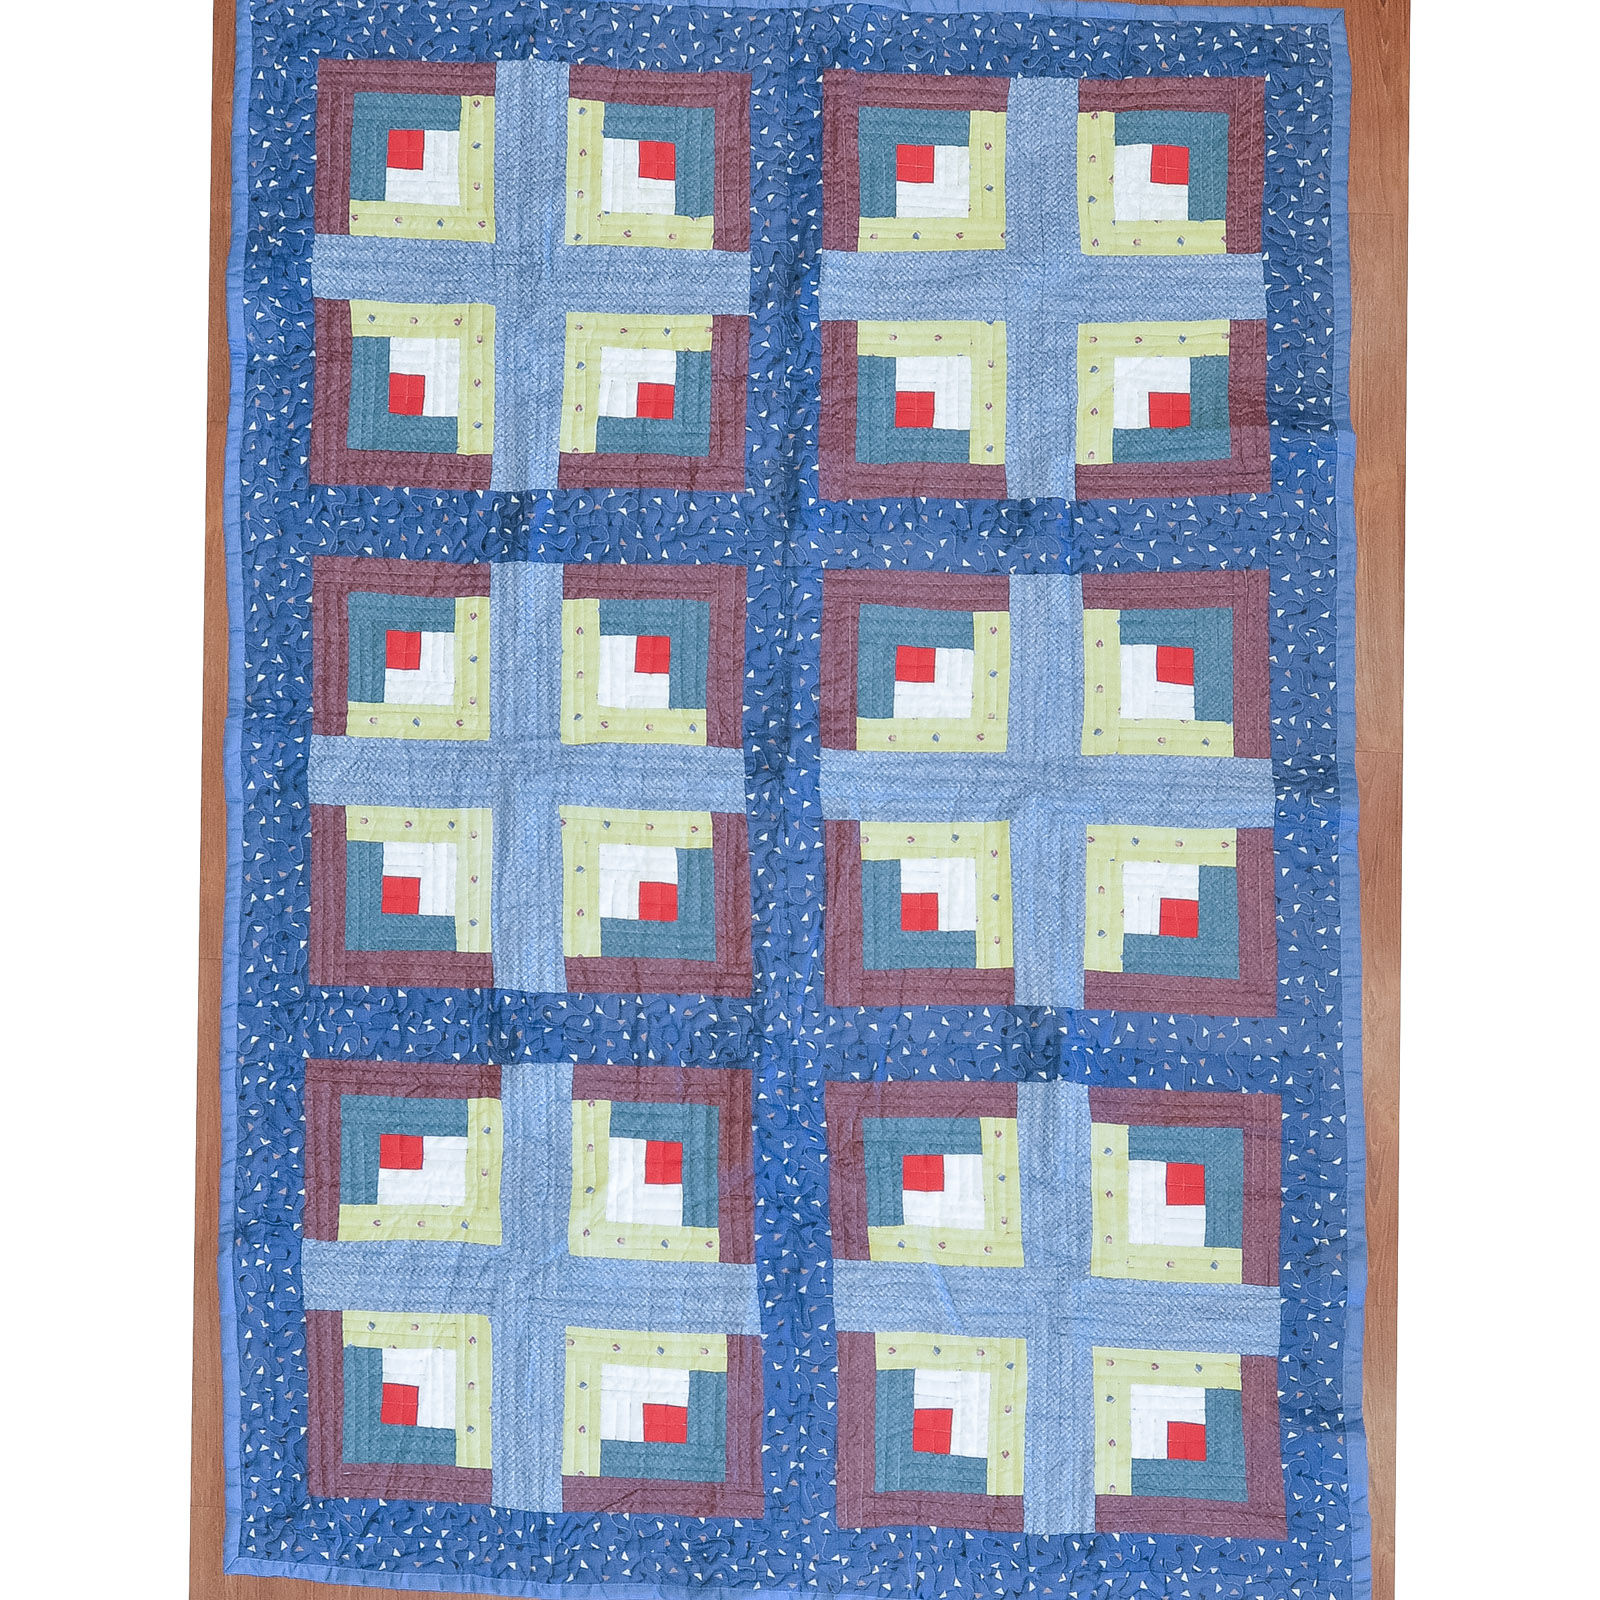 HAND-STITCHED PATCHWORK "CROSS"